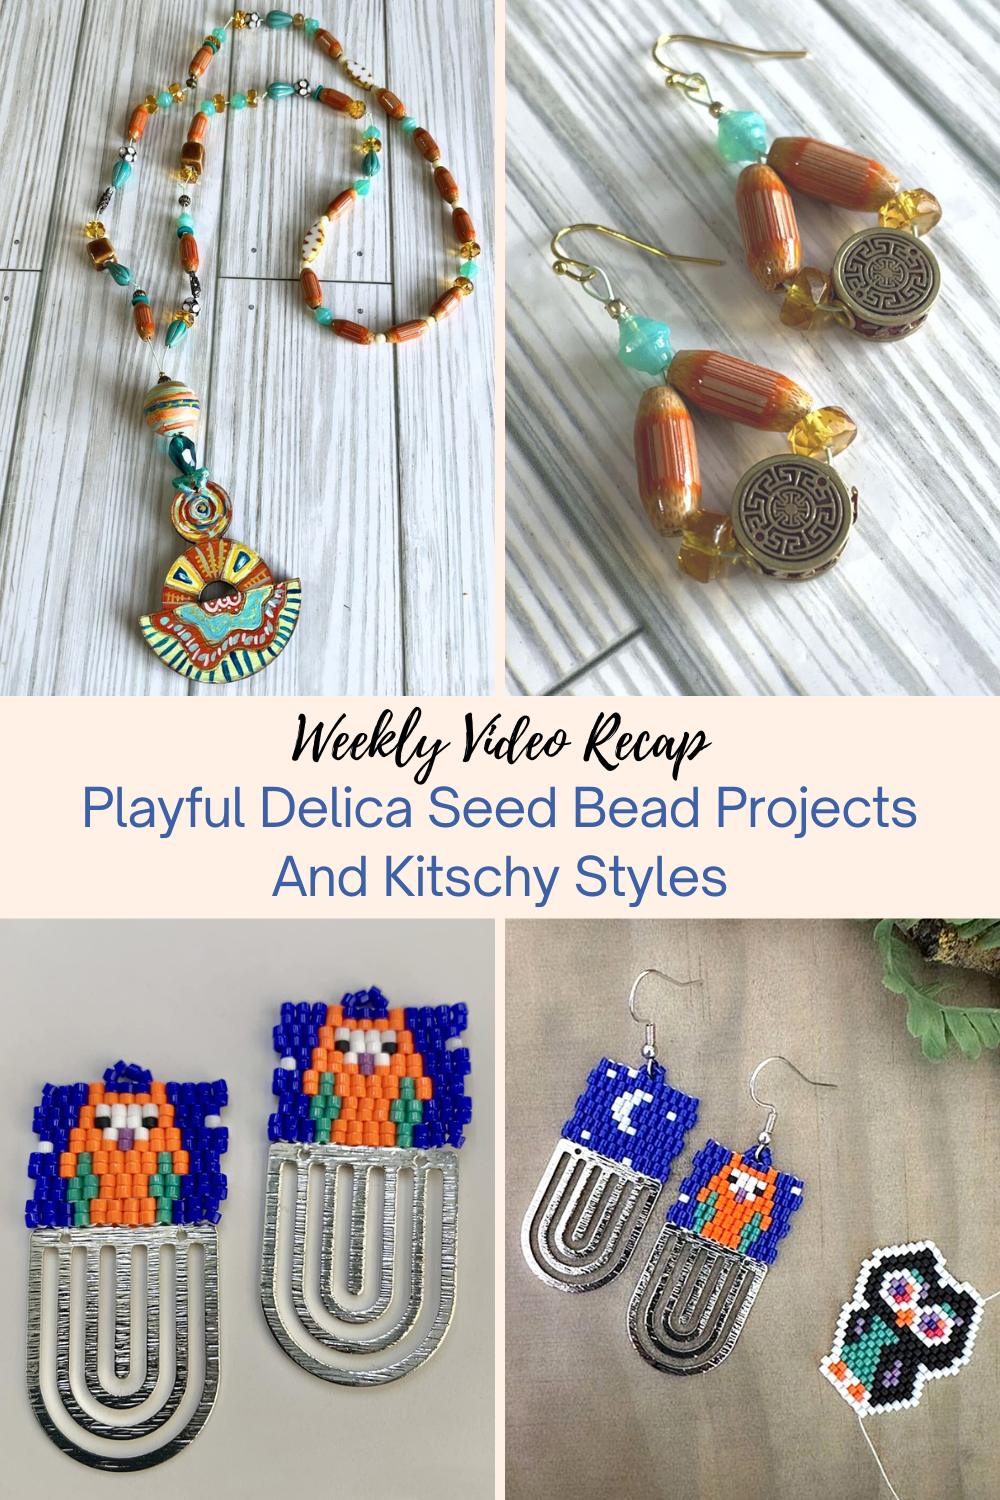 Playful Delica Seed Bead Projects And Kitschy Styles Collage